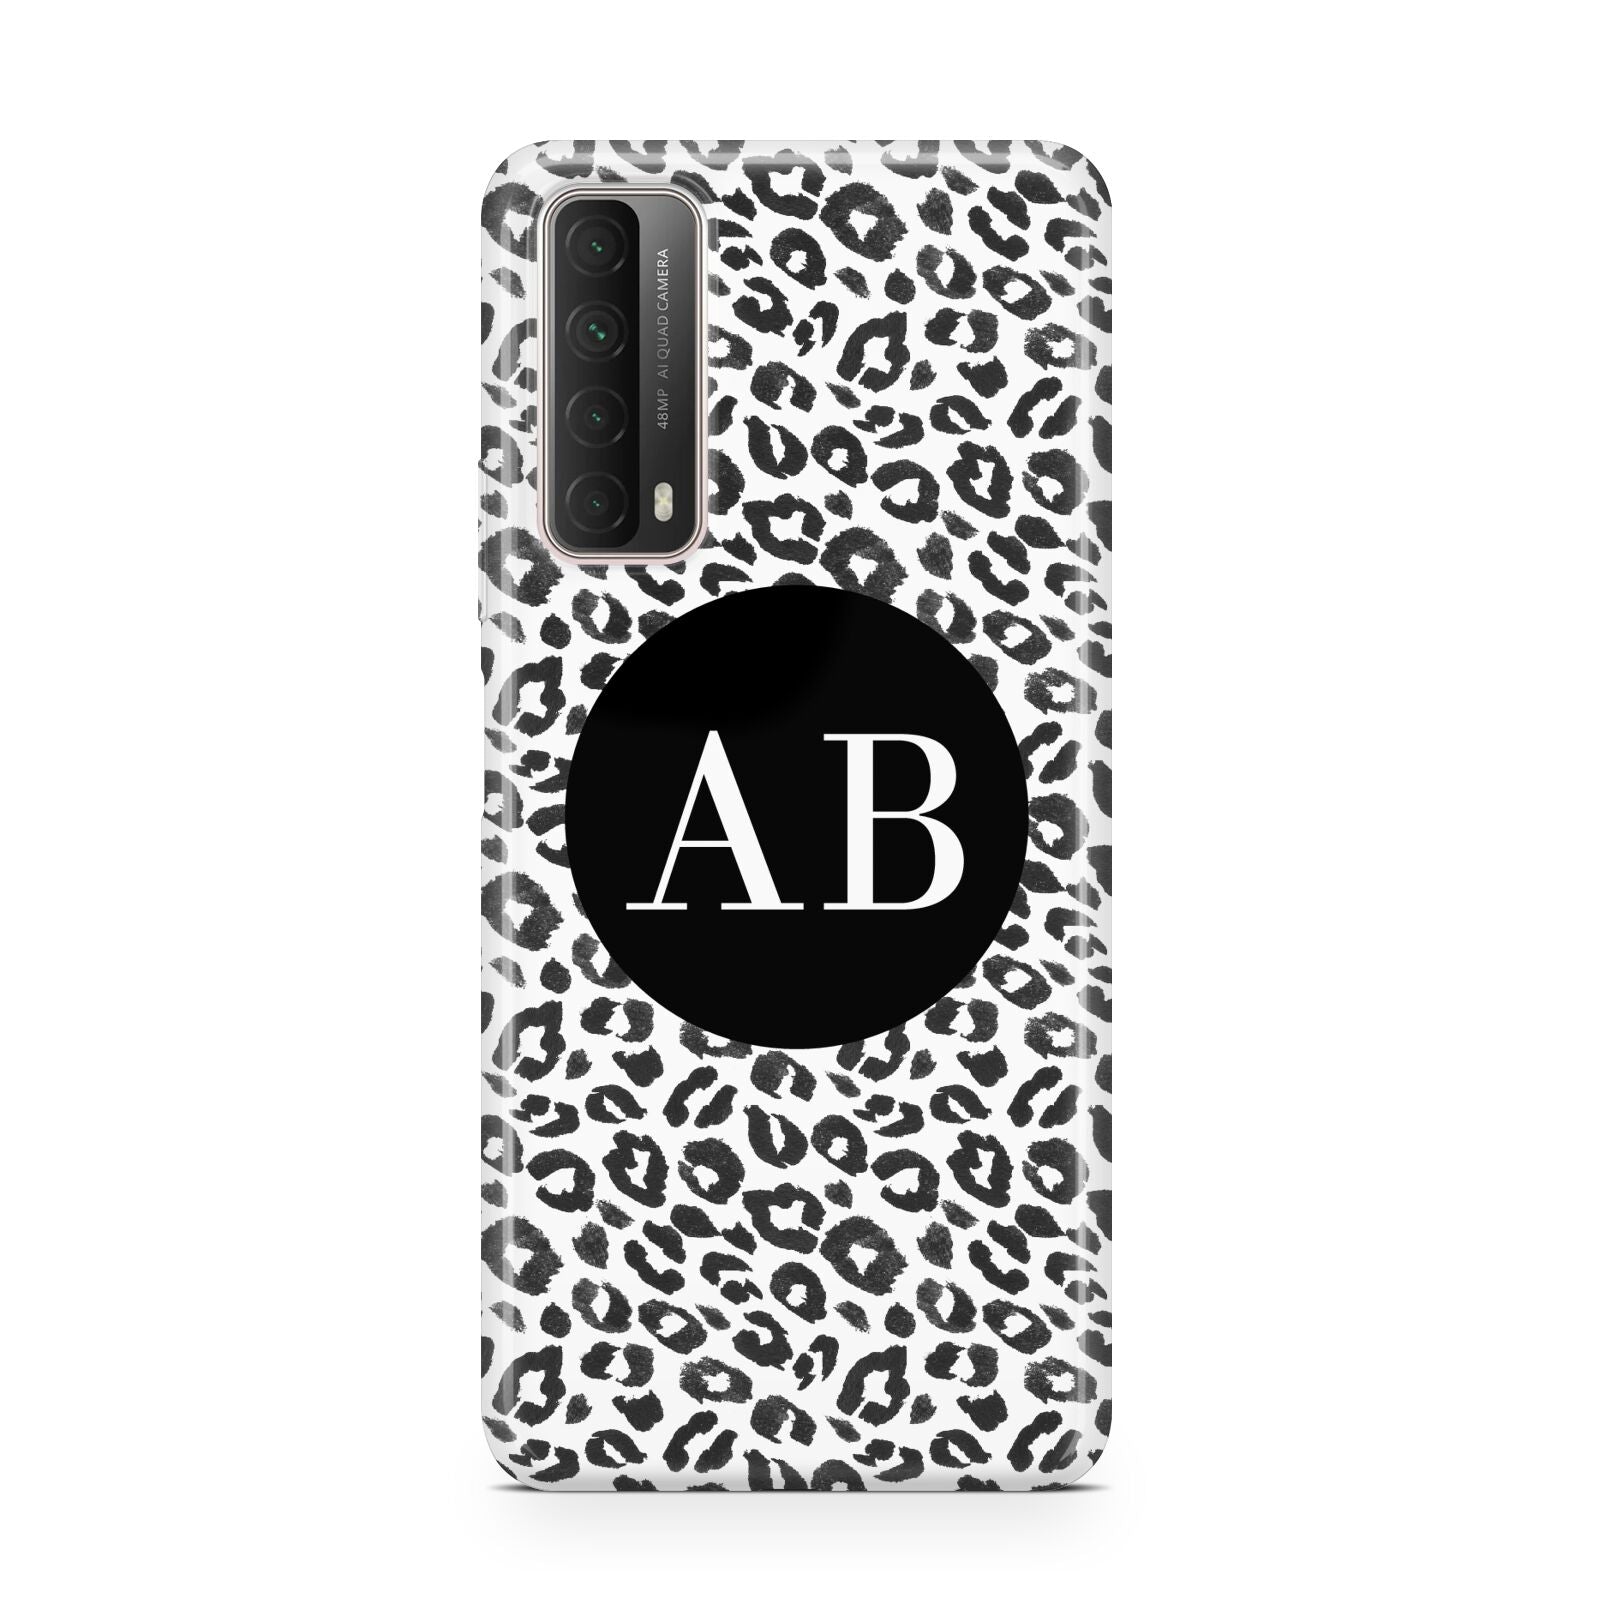 Leopard Print Black and White Huawei P Smart 2021